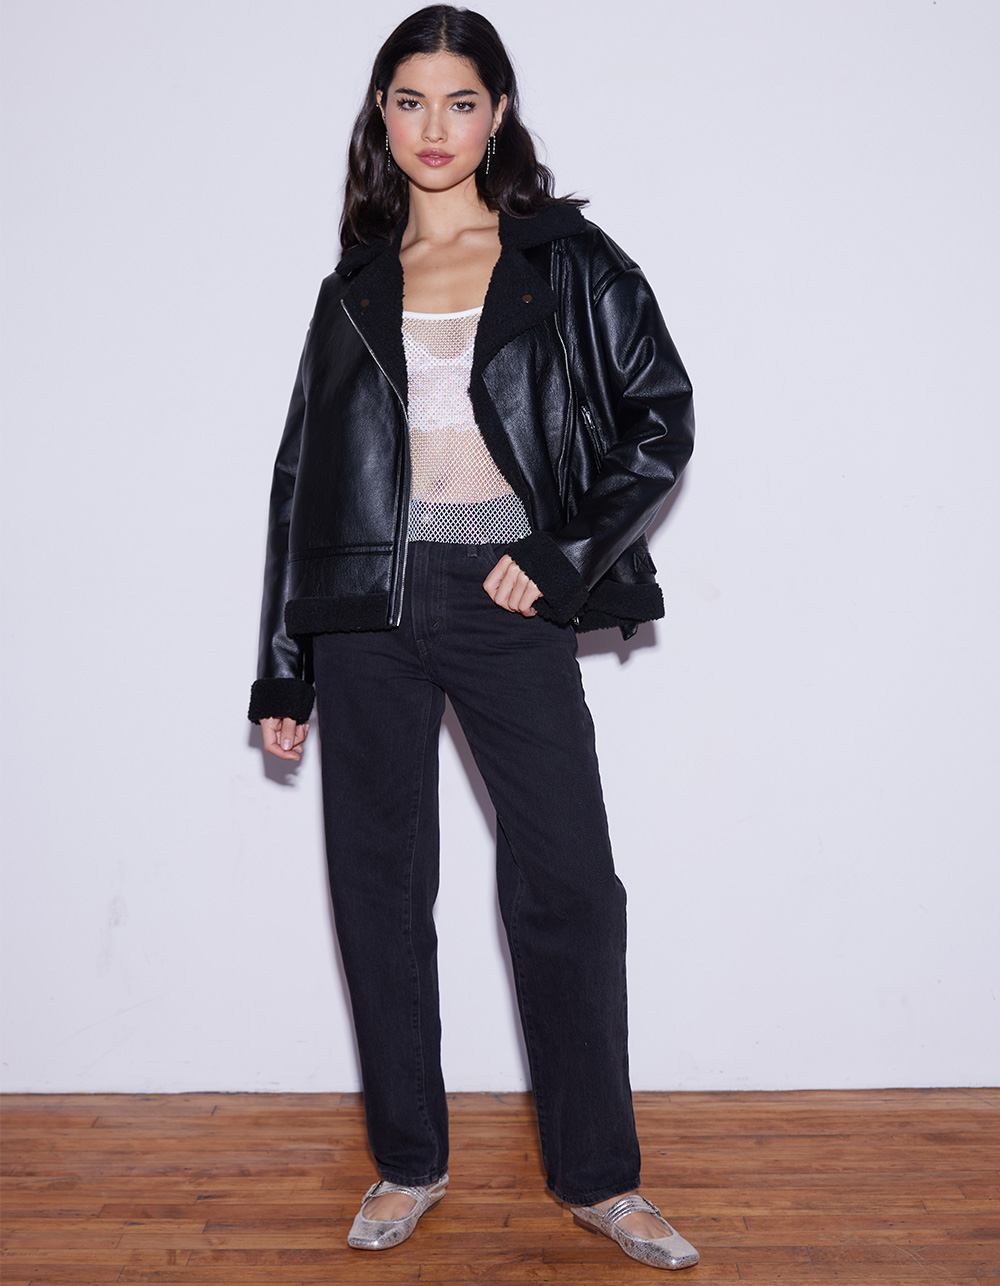 WEST OF MELROSE Faux Leather Shearling Womens Jacket - BLACK | Tillys